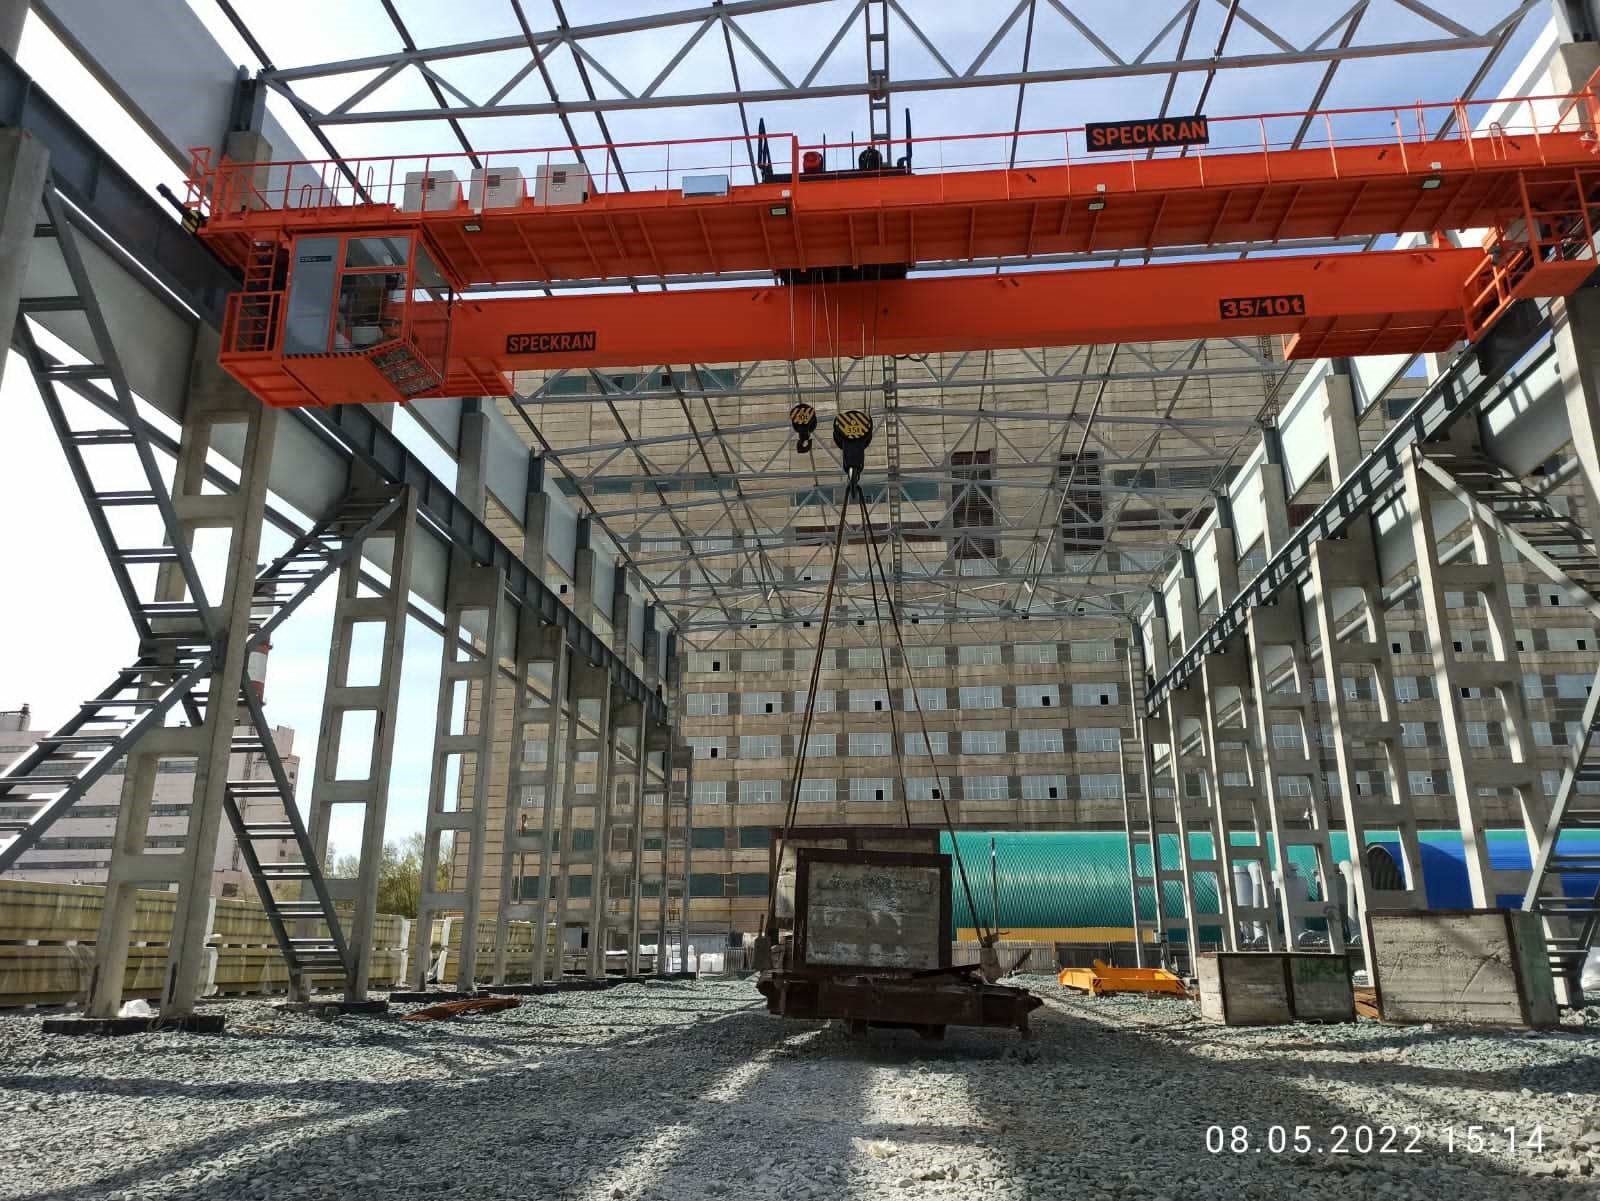 Another completed installation of a container bridge crane for Orenburg Minerals JSC.